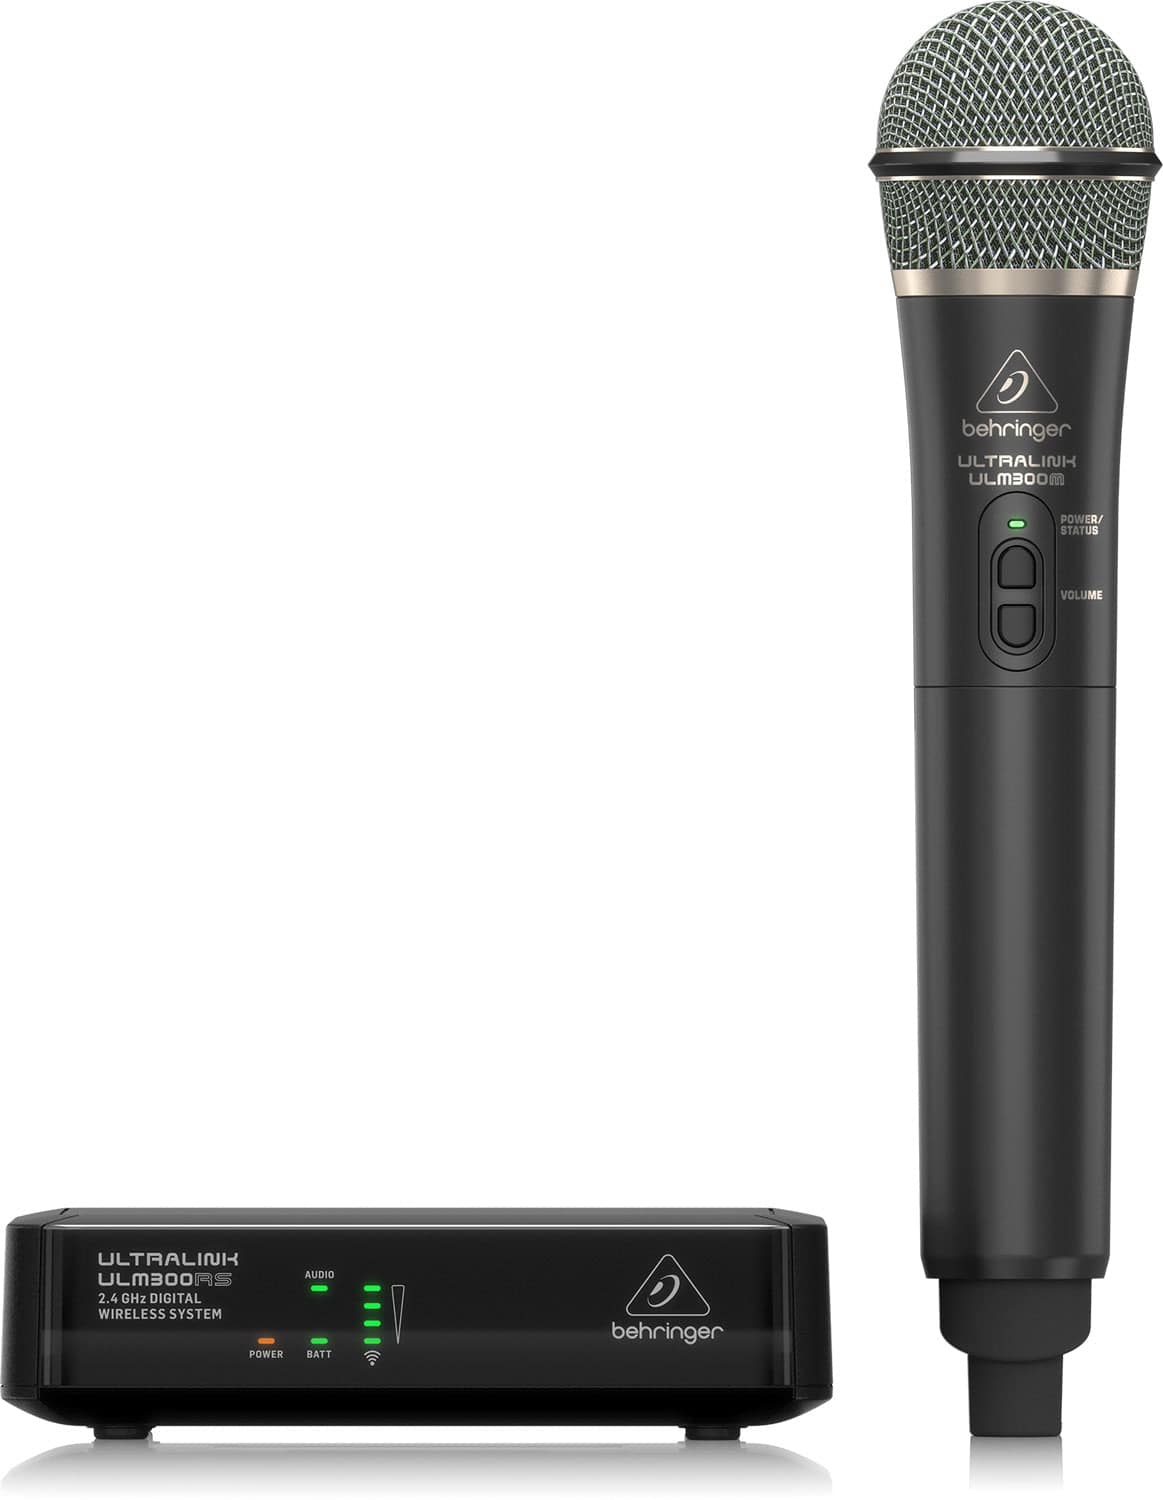 Behringer ULM300MIC, High-Performance 2.4 Ghz Digital Wireless System With Handheld Microphone And Receiver - Hollywood DJ